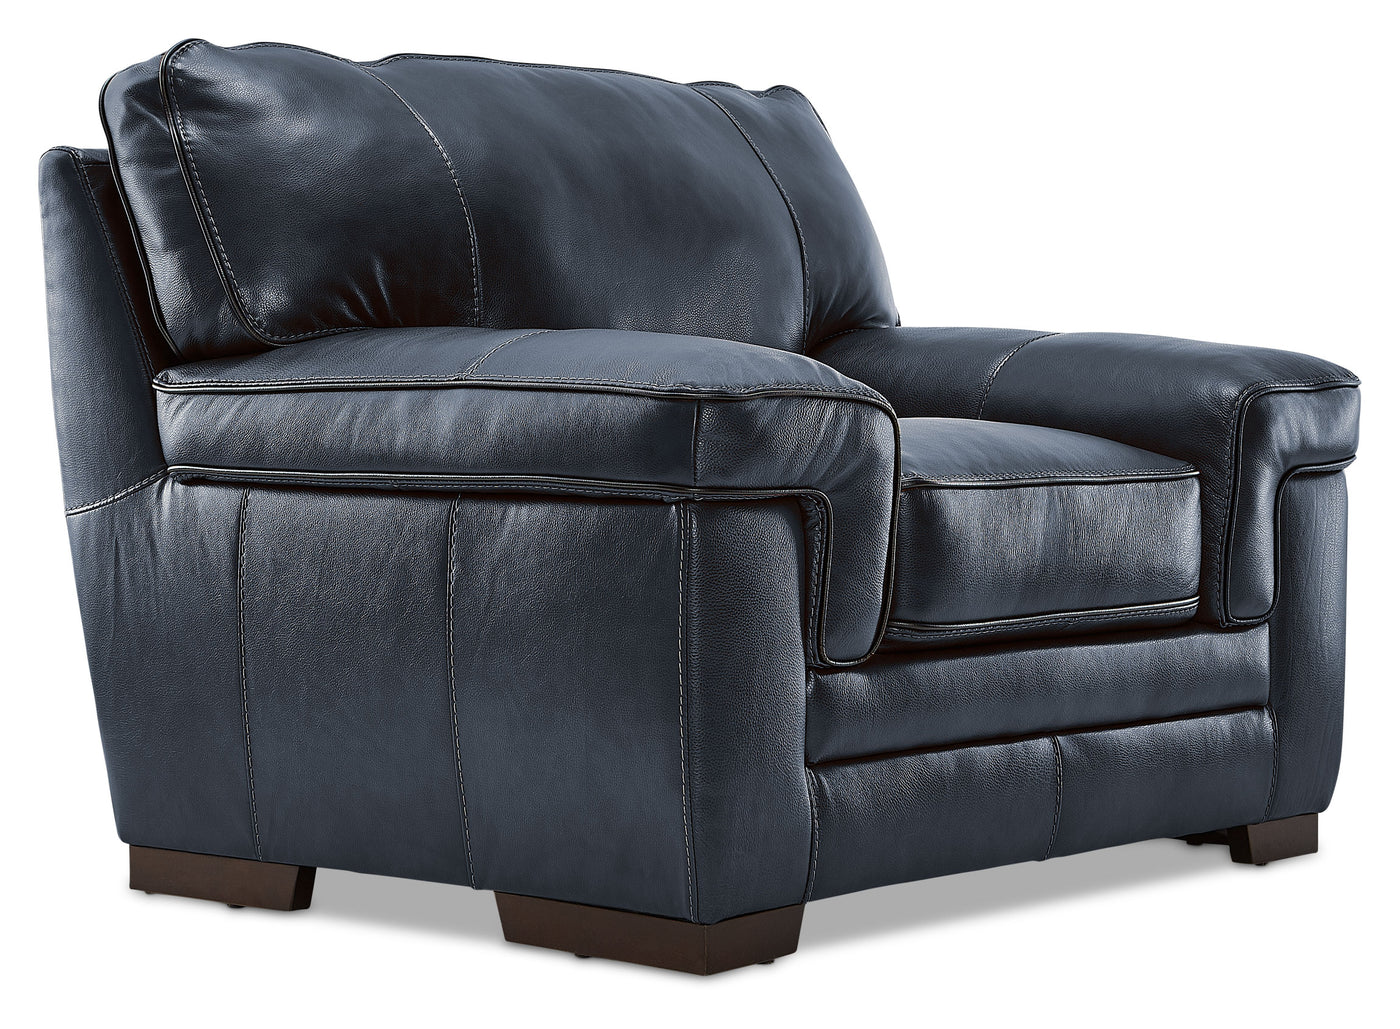 Stampede Leather Sofa, Loveseat and Chair Set - Cobalt